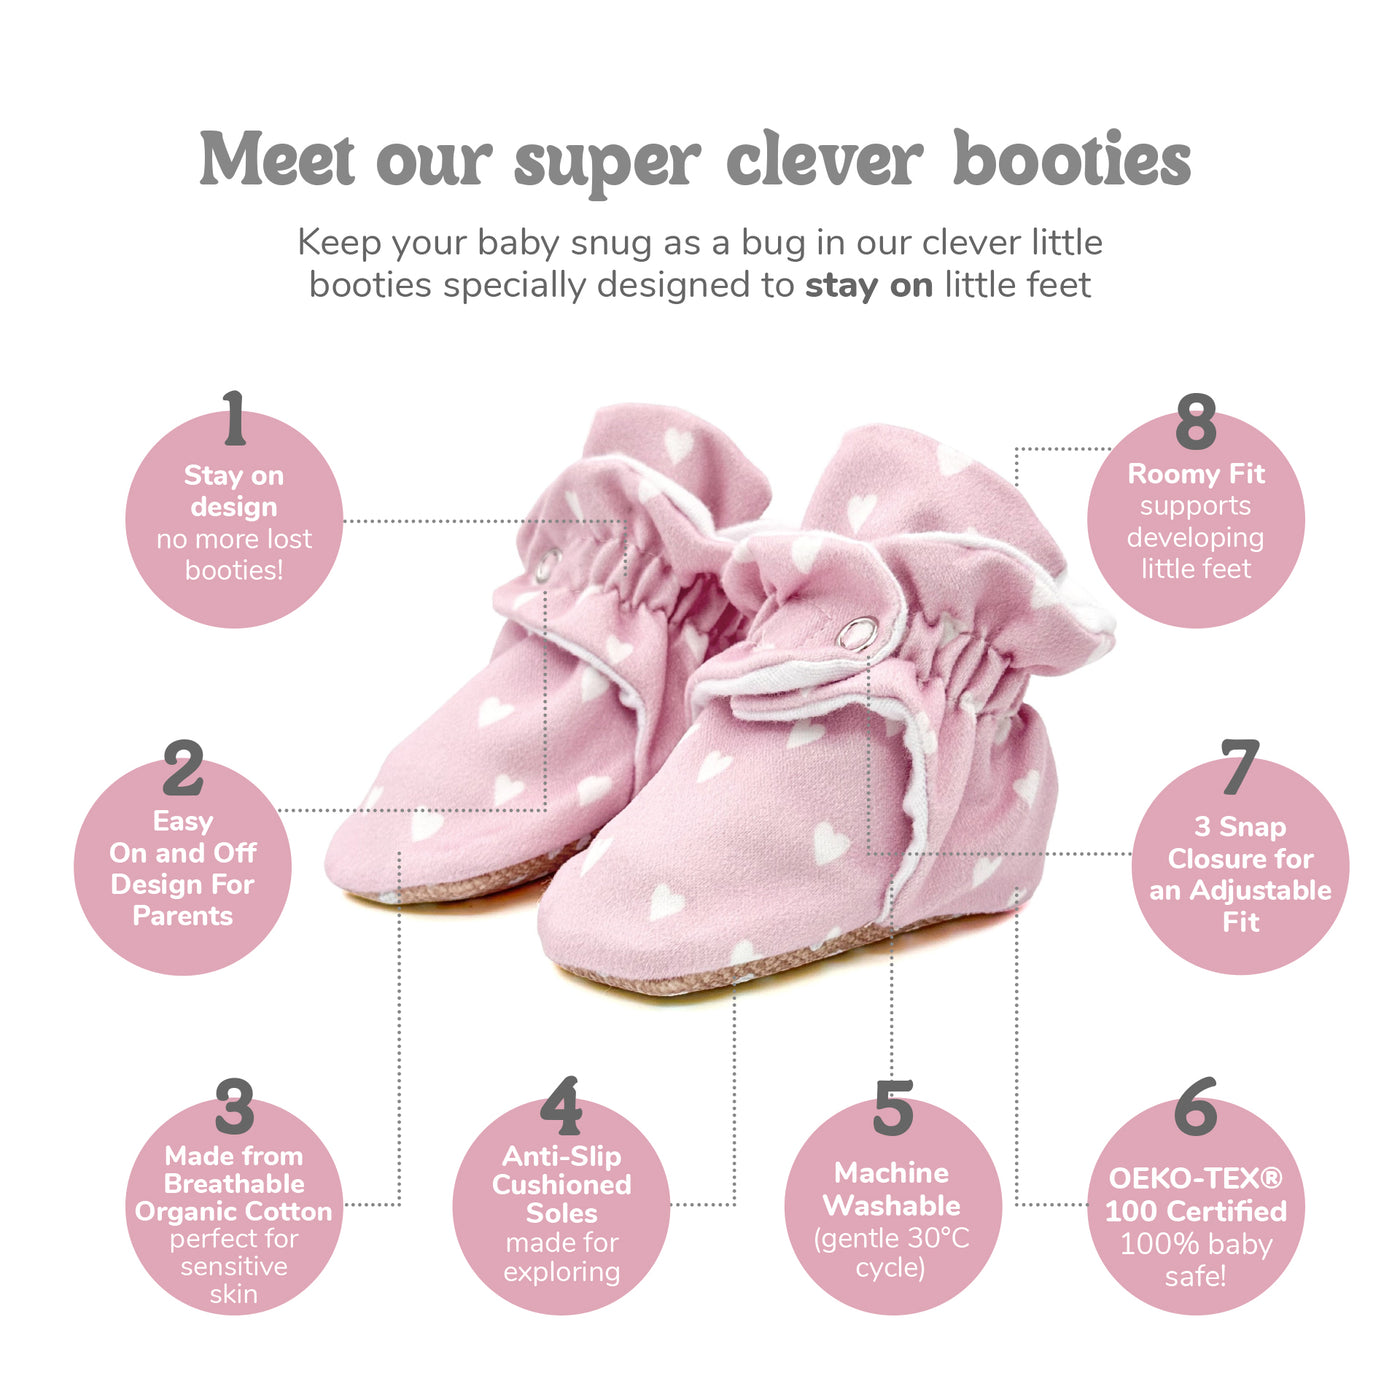 Snugabugz Stay On Non Slip Booties Infographic with details of the Bootie features including the stay on design, organic cotton, non slip soles, 3 popper closure, easy on design for parents and machine washable